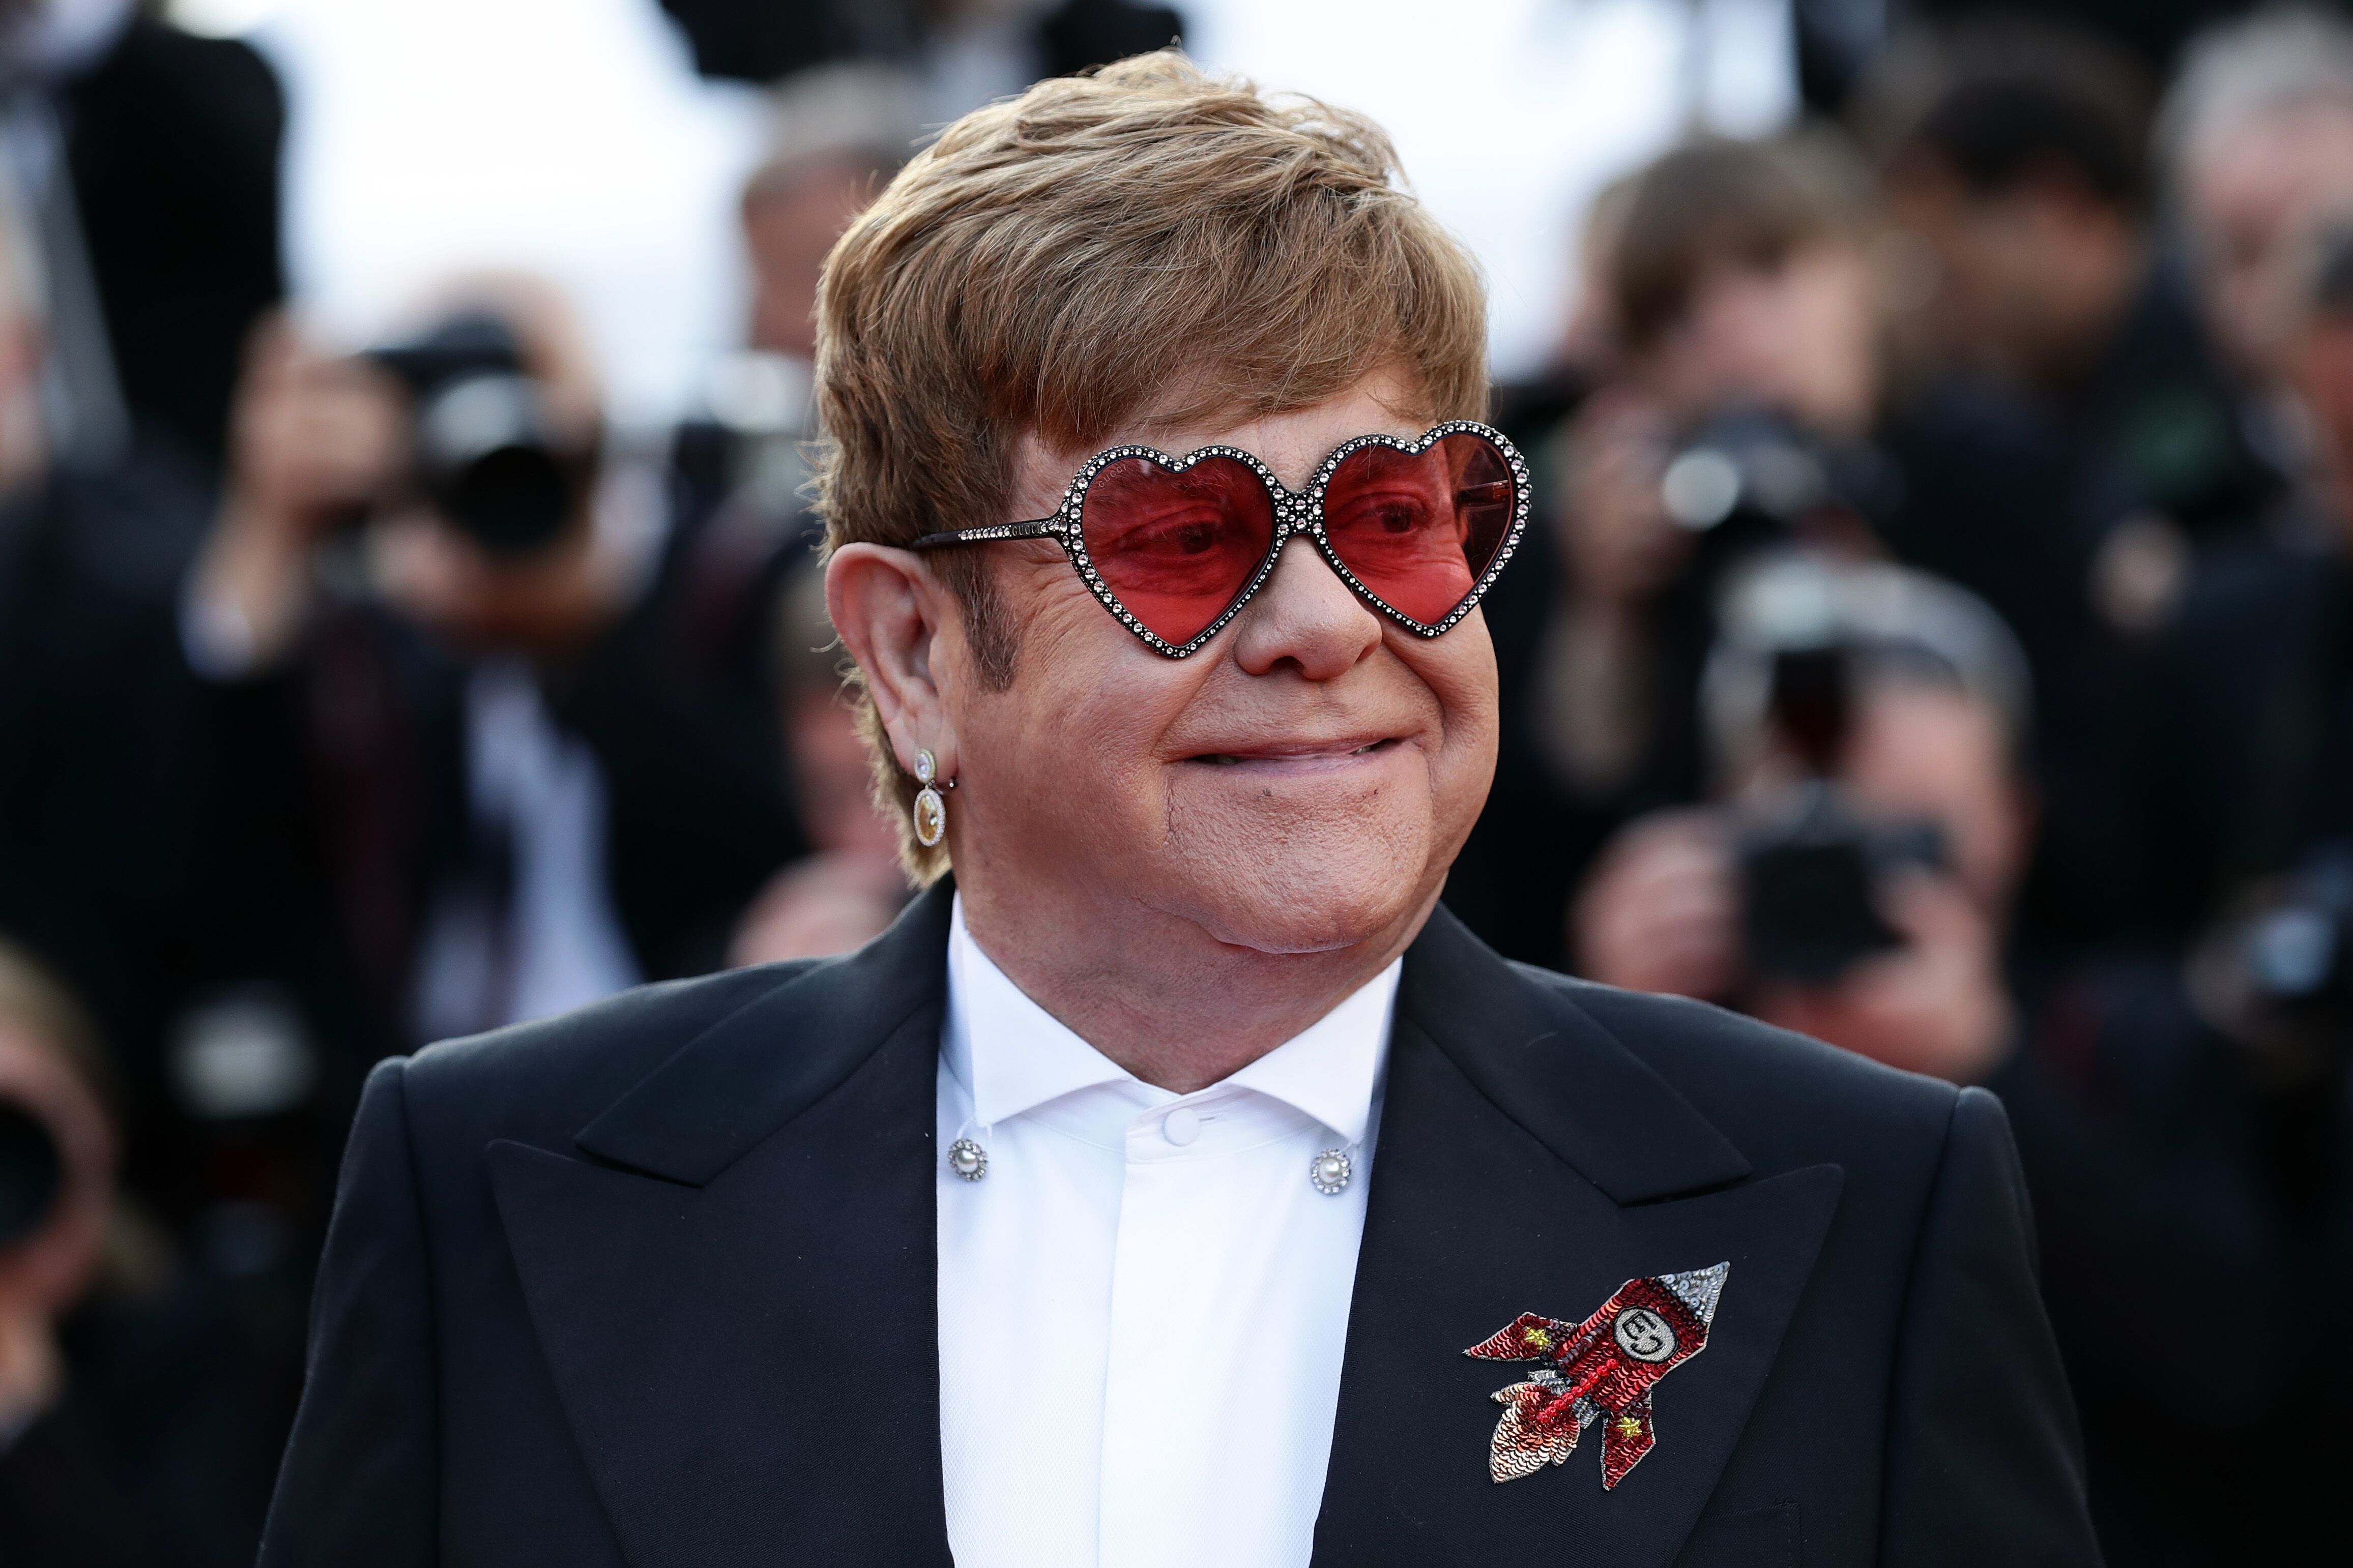 Sir Elton John at the screening of "Rocketman" during the 72nd annual Cannes Film Festival on May 16, 2019, in France | Photo: Vittorio Zunino Celotto/Getty Images